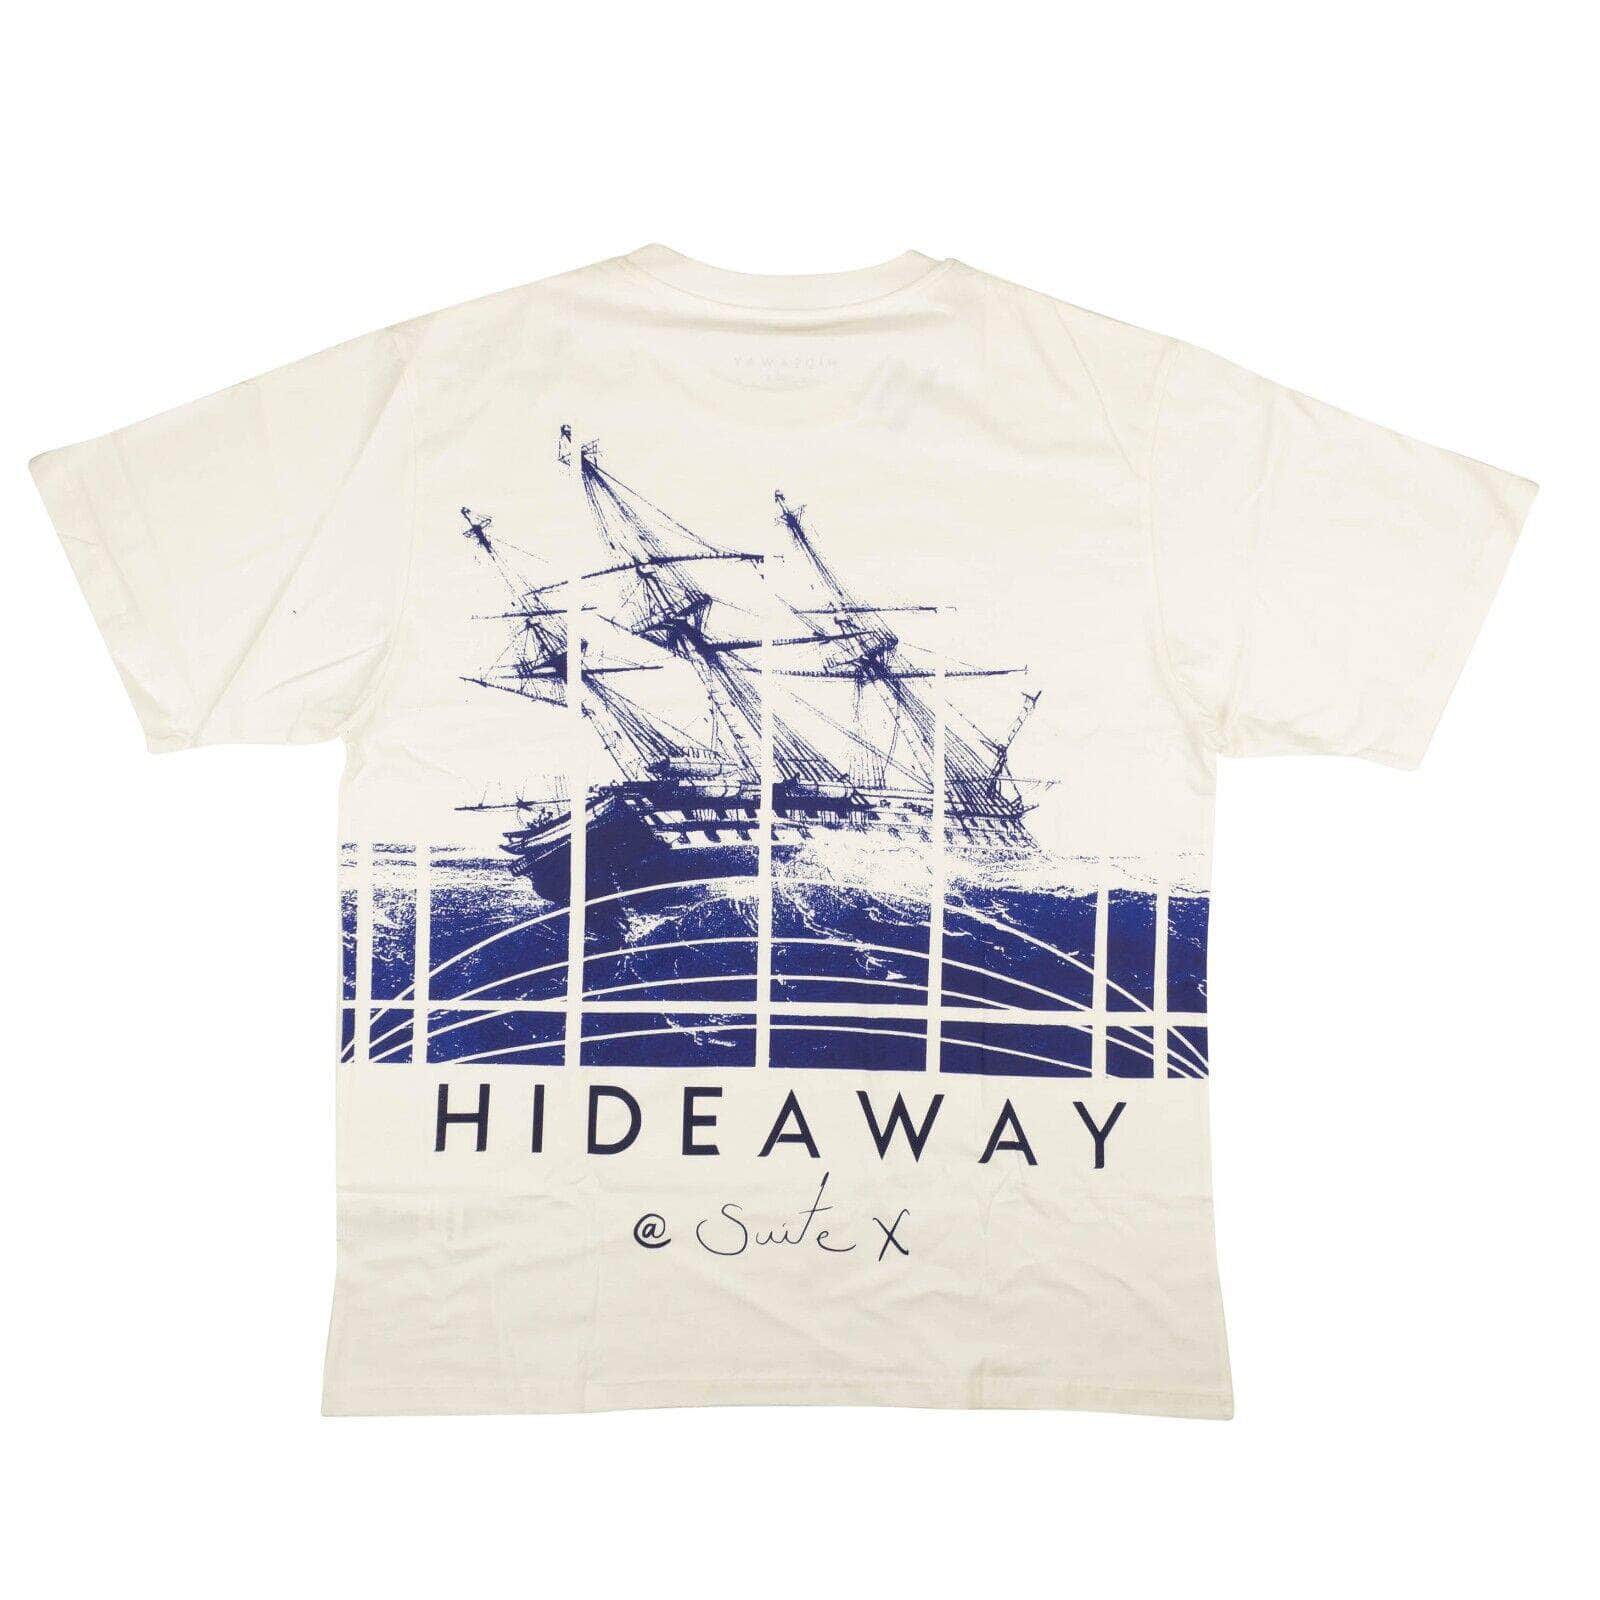 HIDEAWAY channelenable-all, chicmi, couponcollection, gender-mens, main-clothing, shop375 White Porto Cervo Logo Short Sleeve T-Shirt